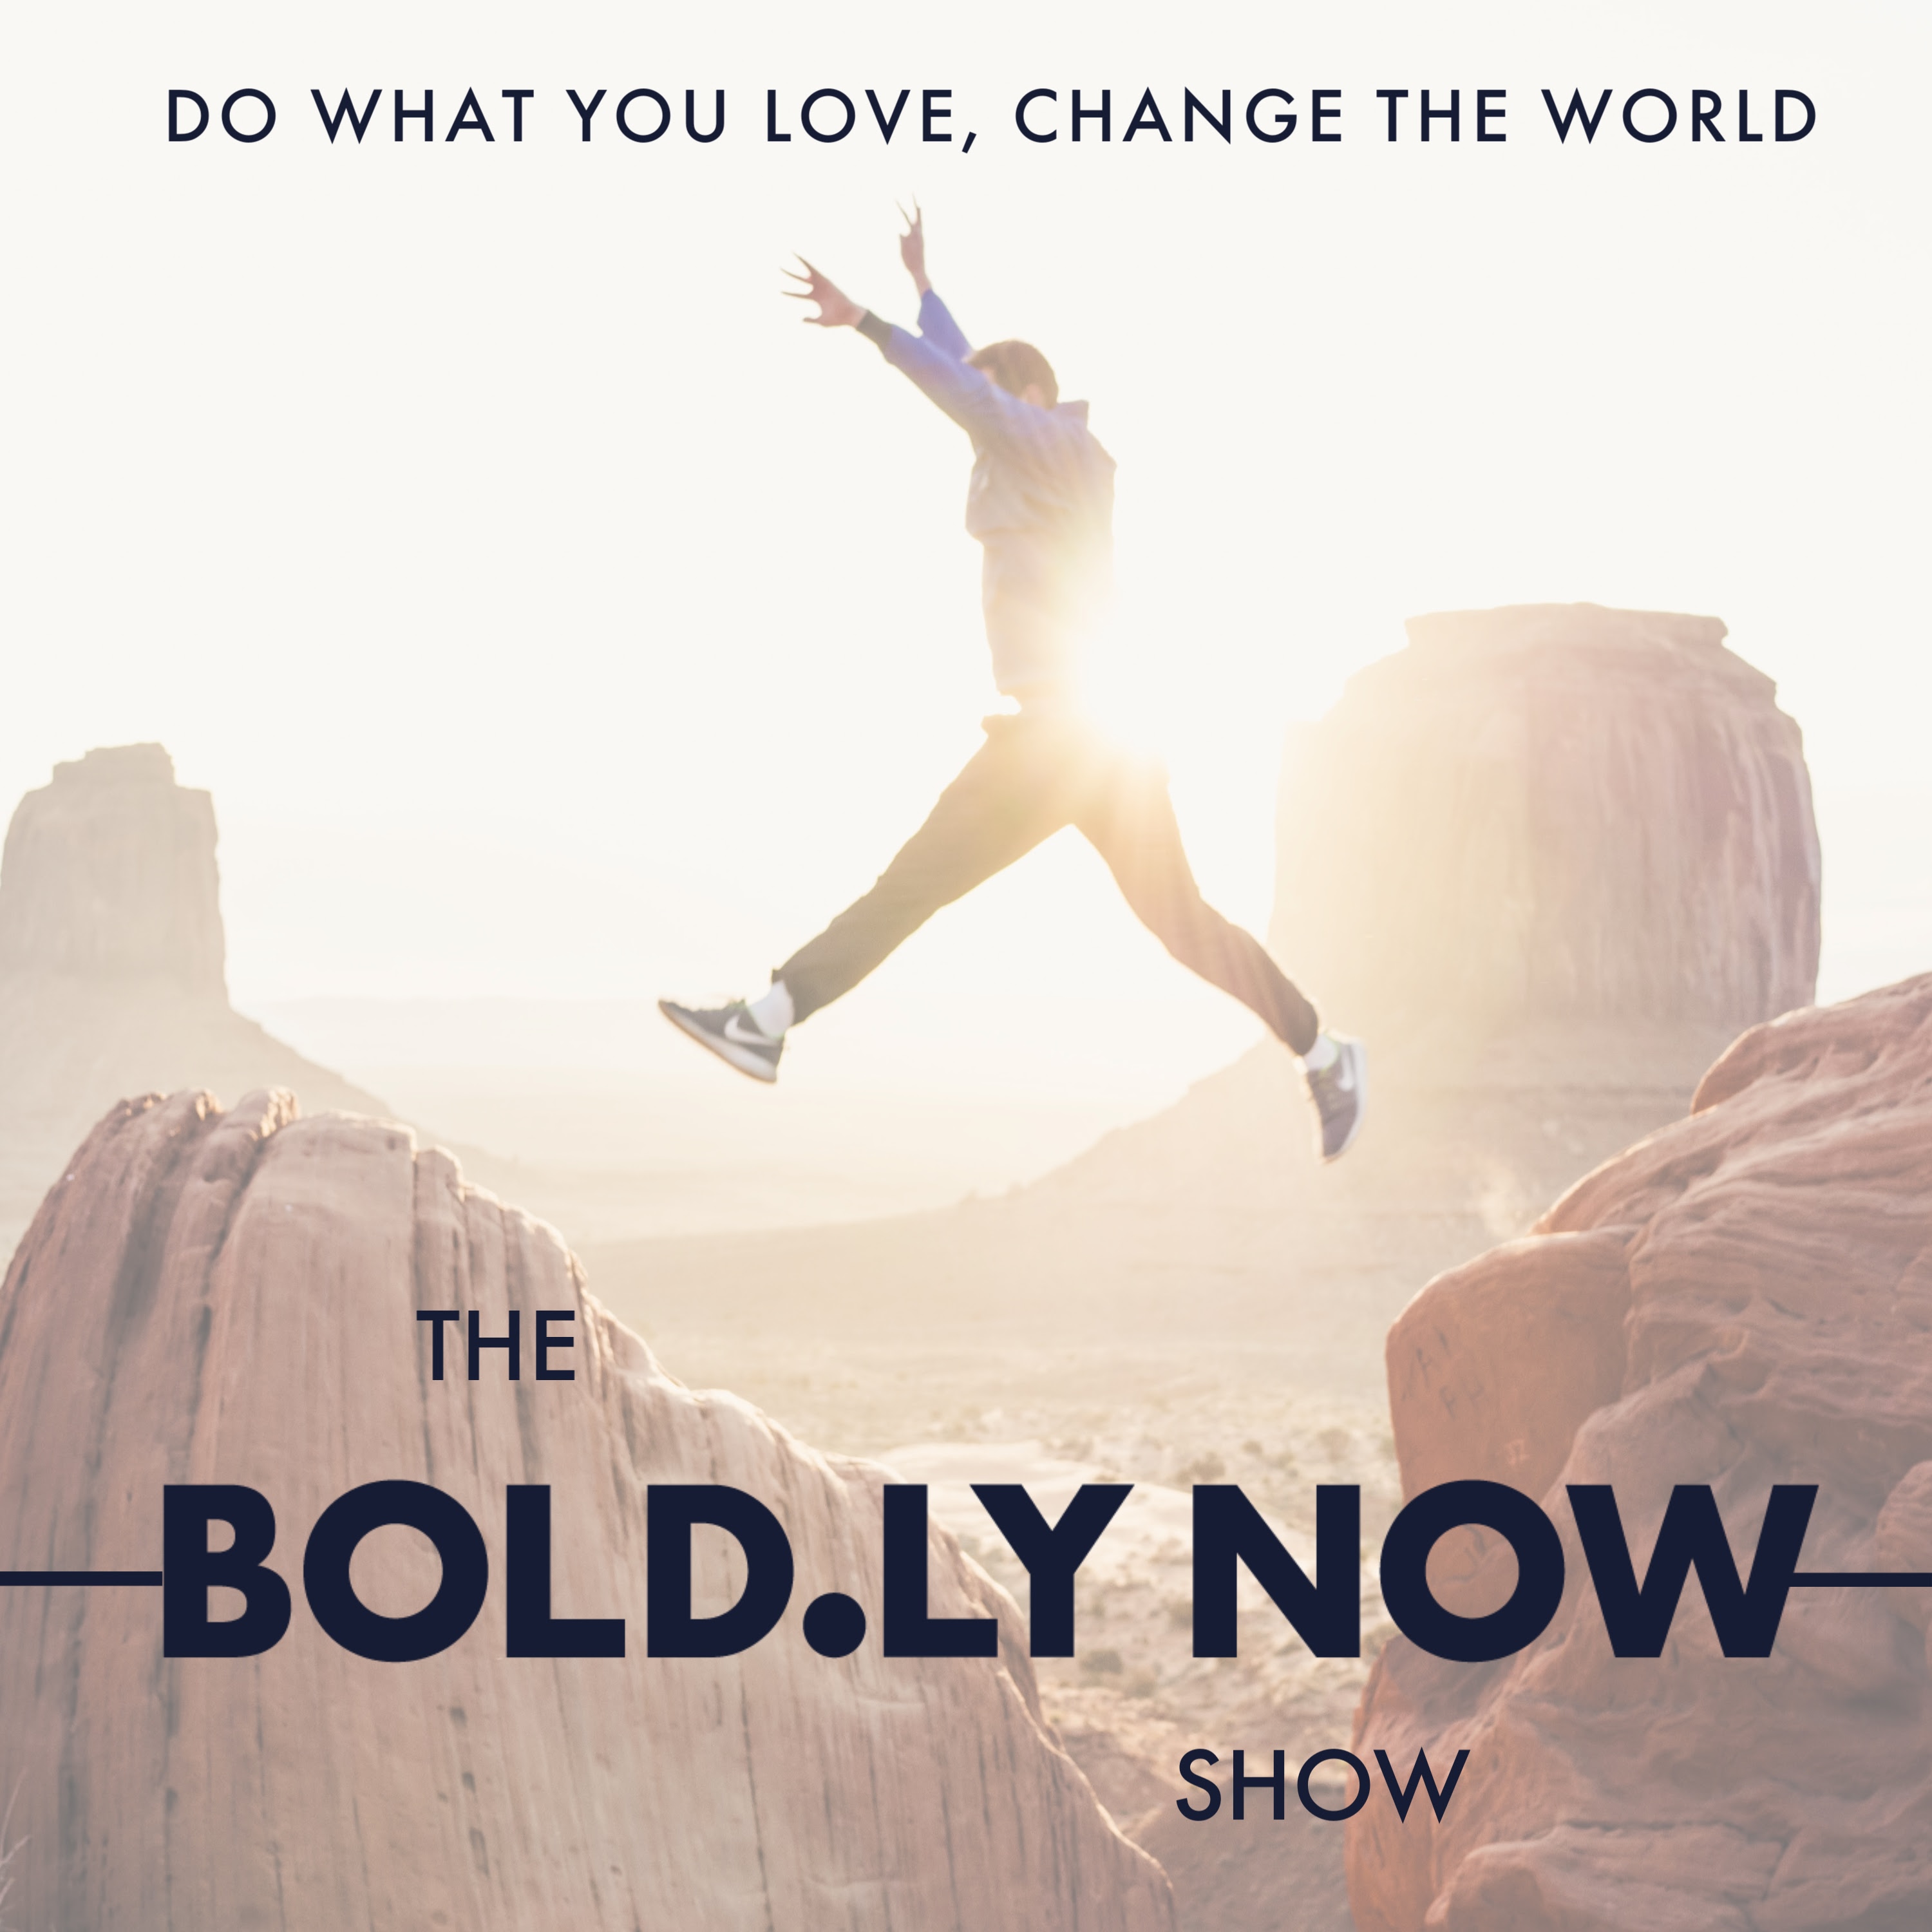 Artwork for The Boldly Now Show